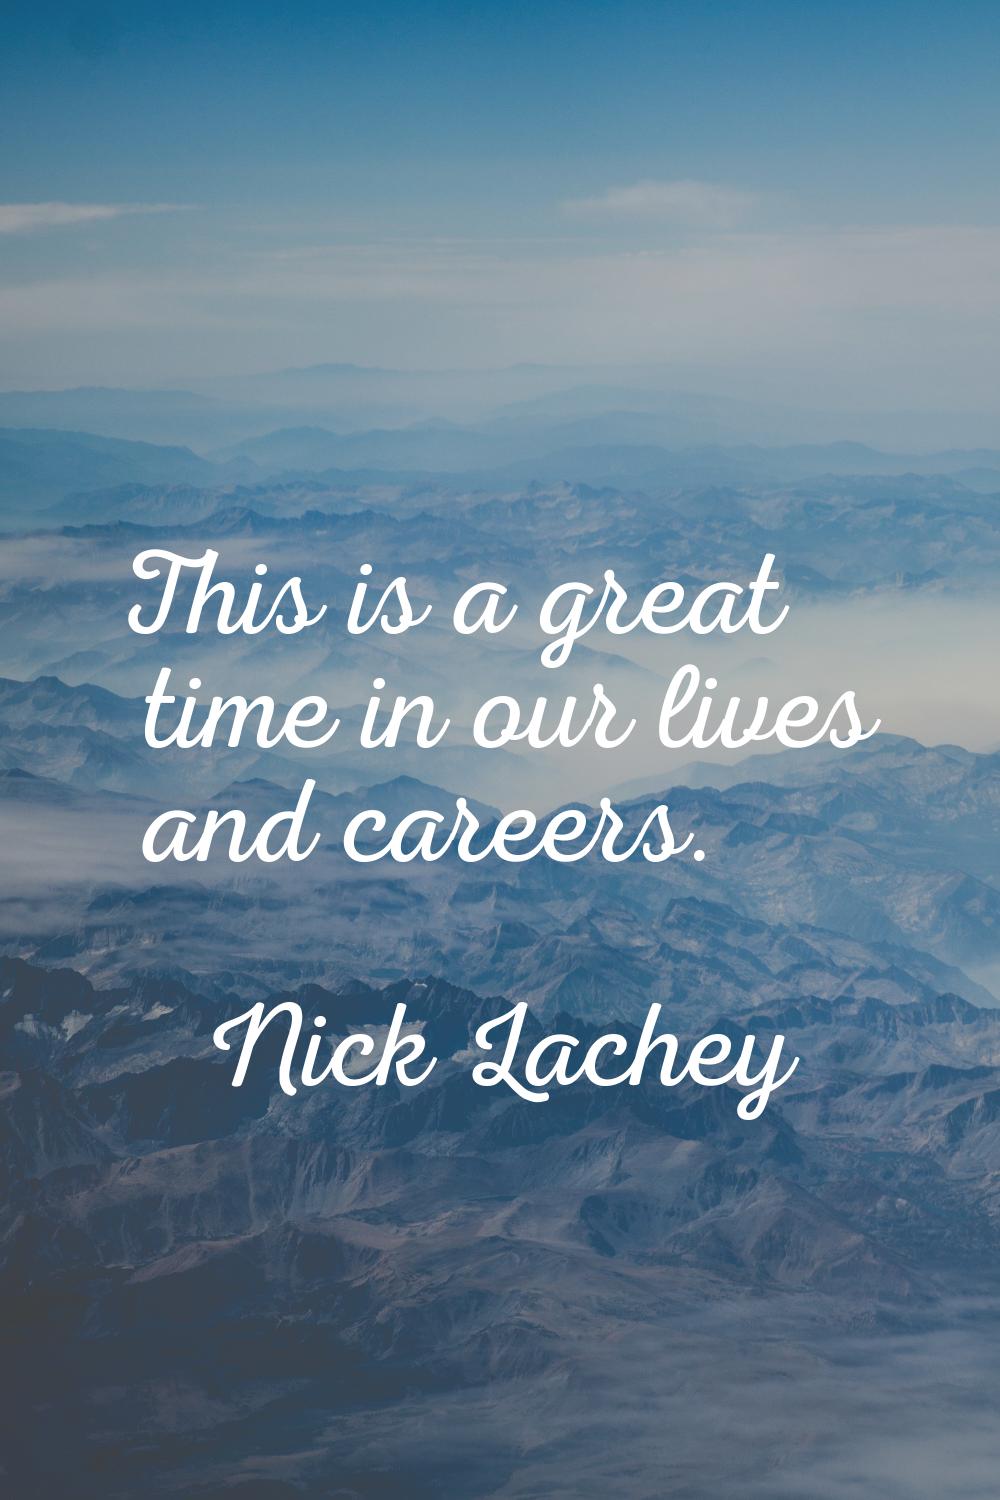 This is a great time in our lives and careers.